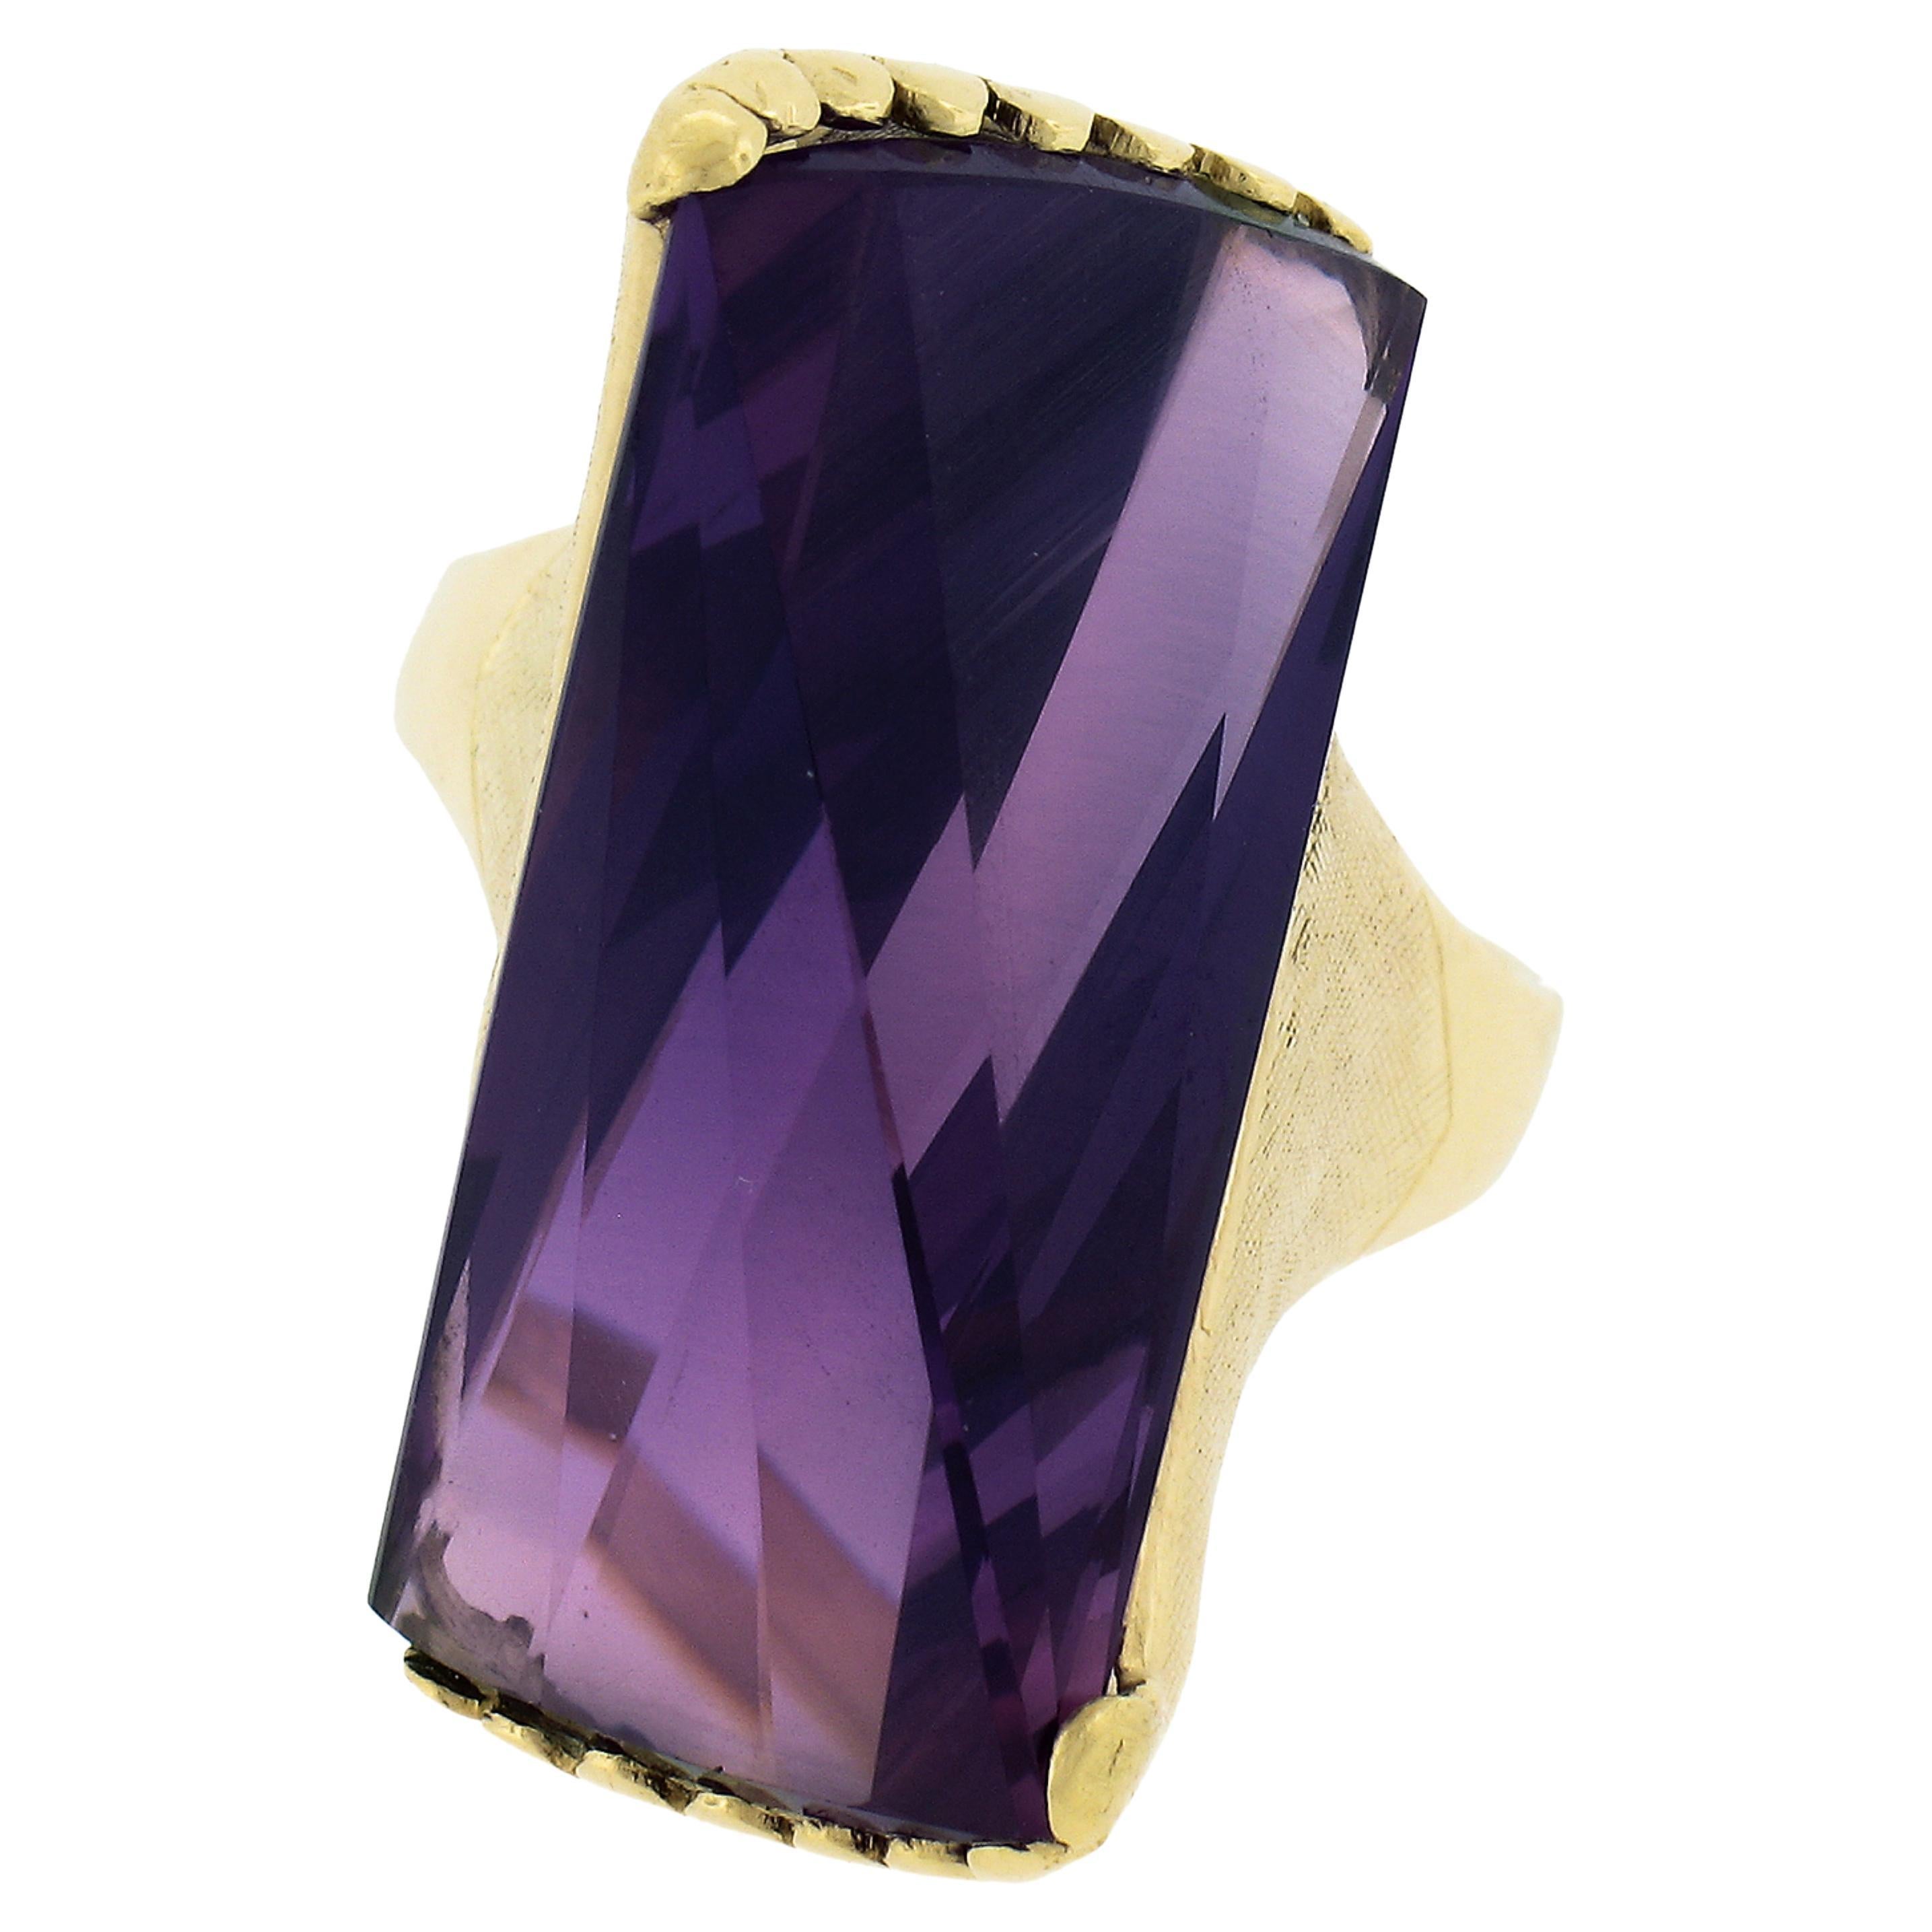 What does alexandrite symbolize?